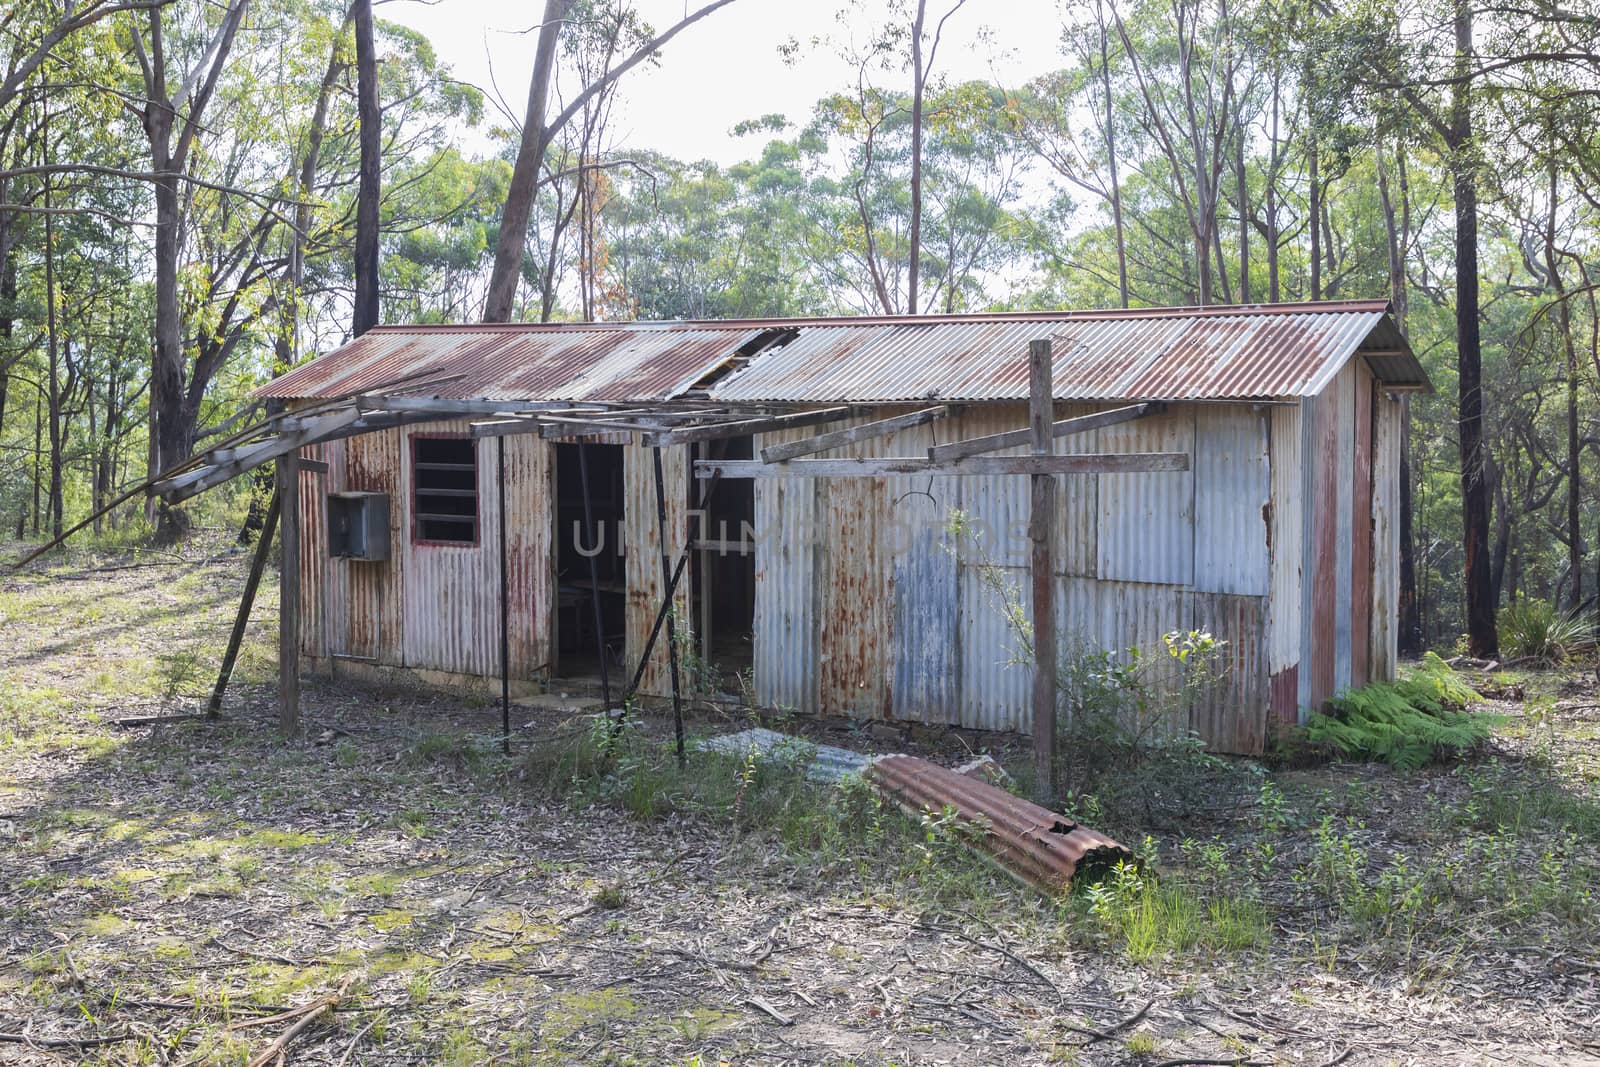 An old dilapidated building in the Wollemi National Park in regional New South Wales